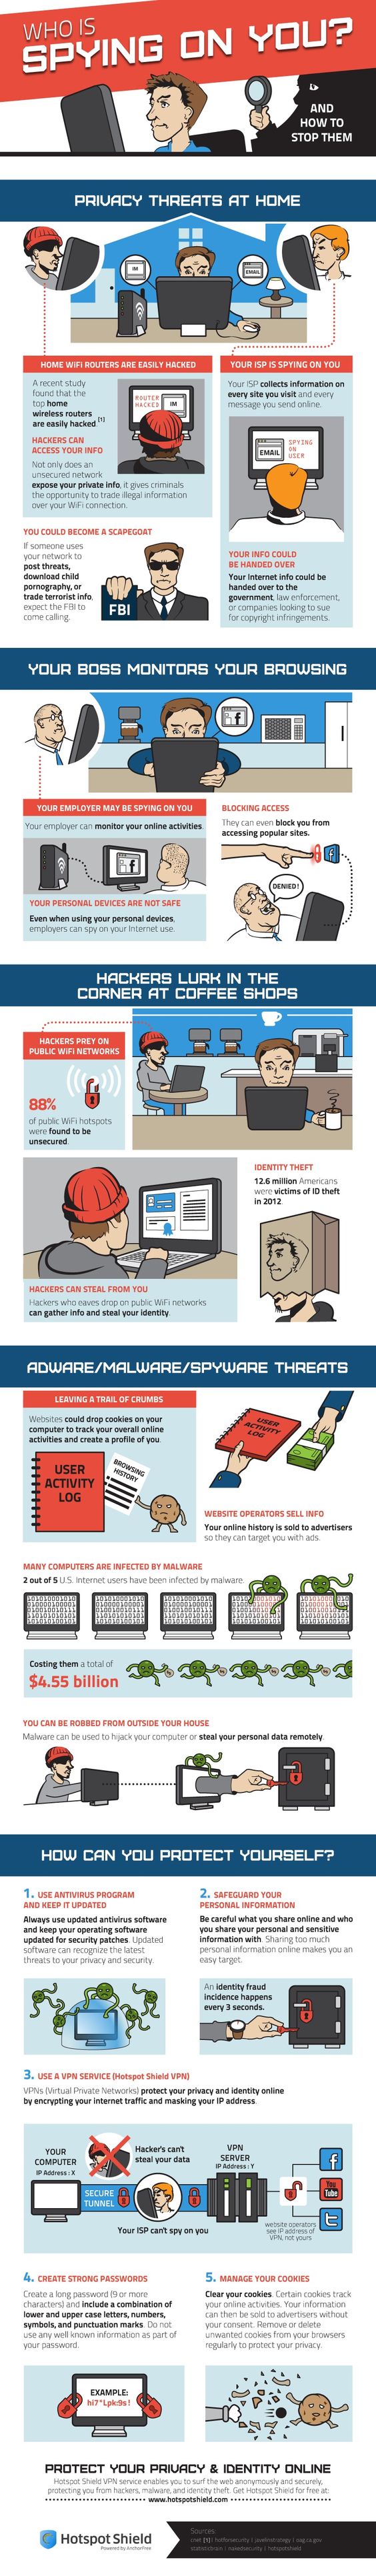 Public Wi-Fi Security Guide Infographic